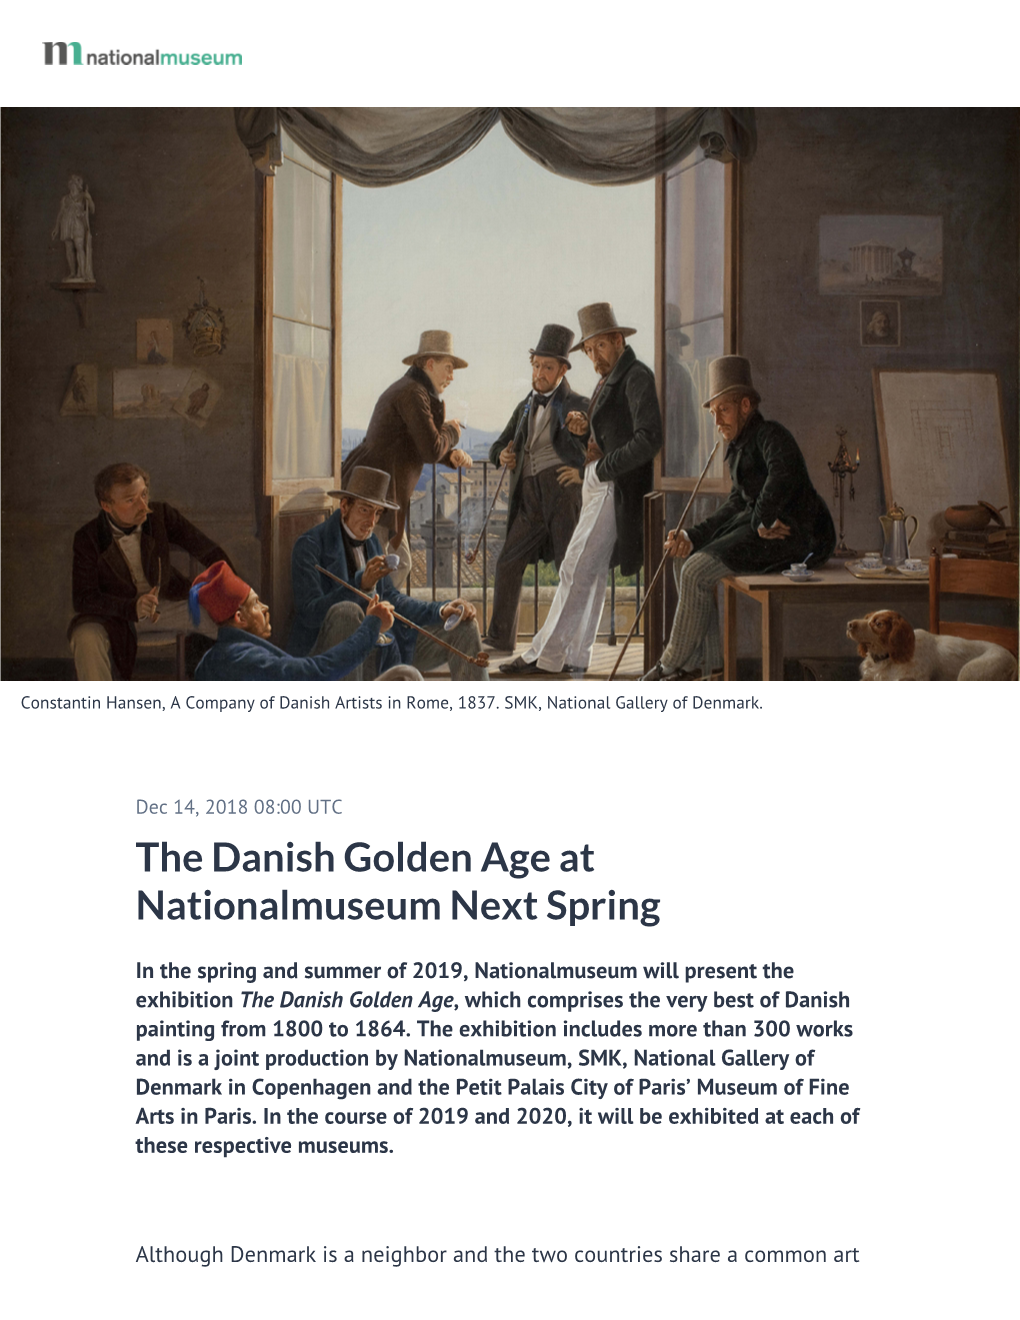 The Danish Golden Age at Nationalmuseum Next Spring